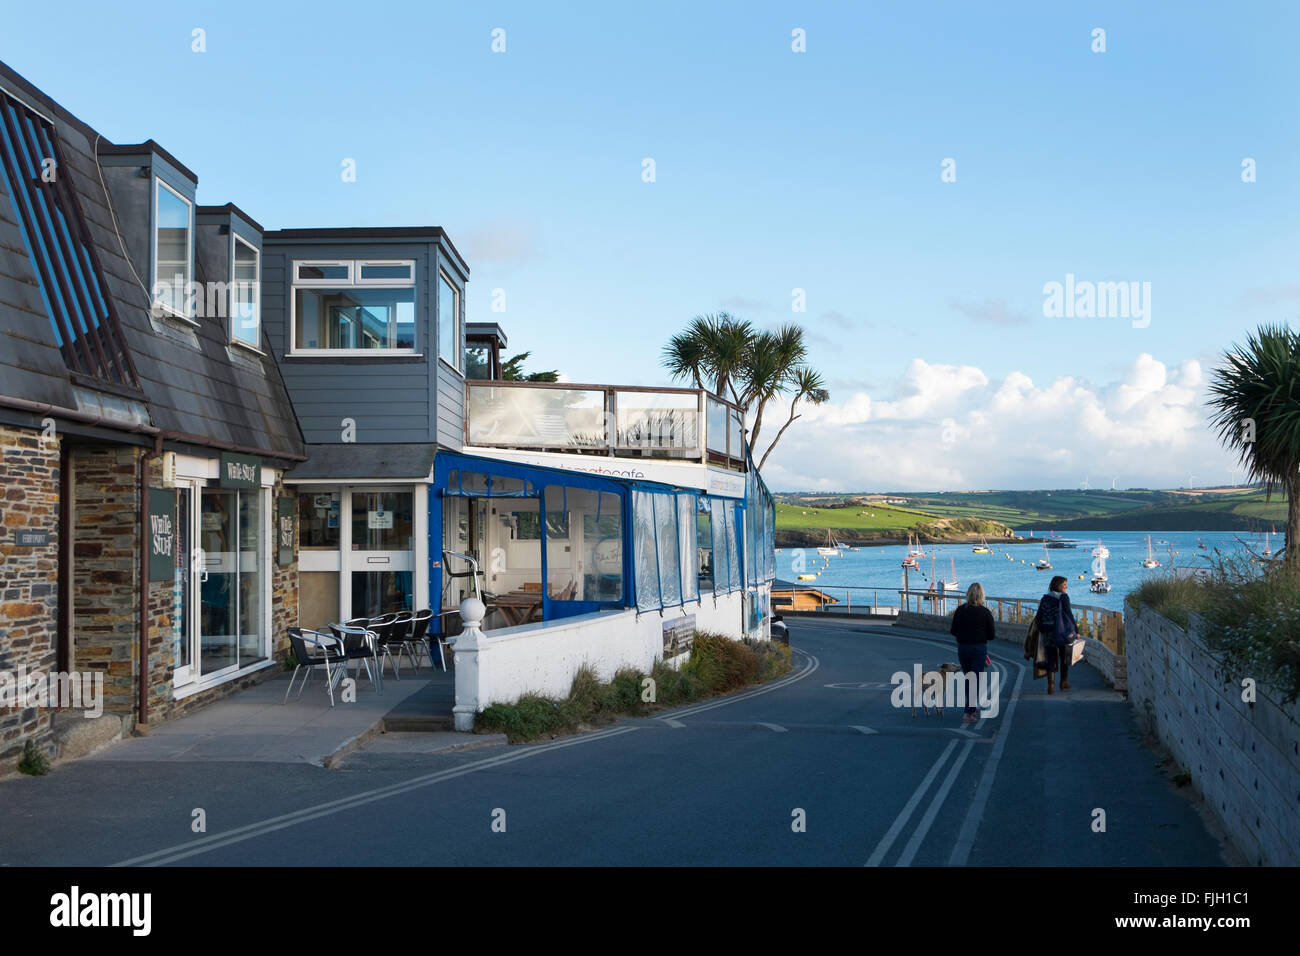 The Blue Tomato cafe and White Stuff shop at Rock, Cornwall, UK. Stock Photo